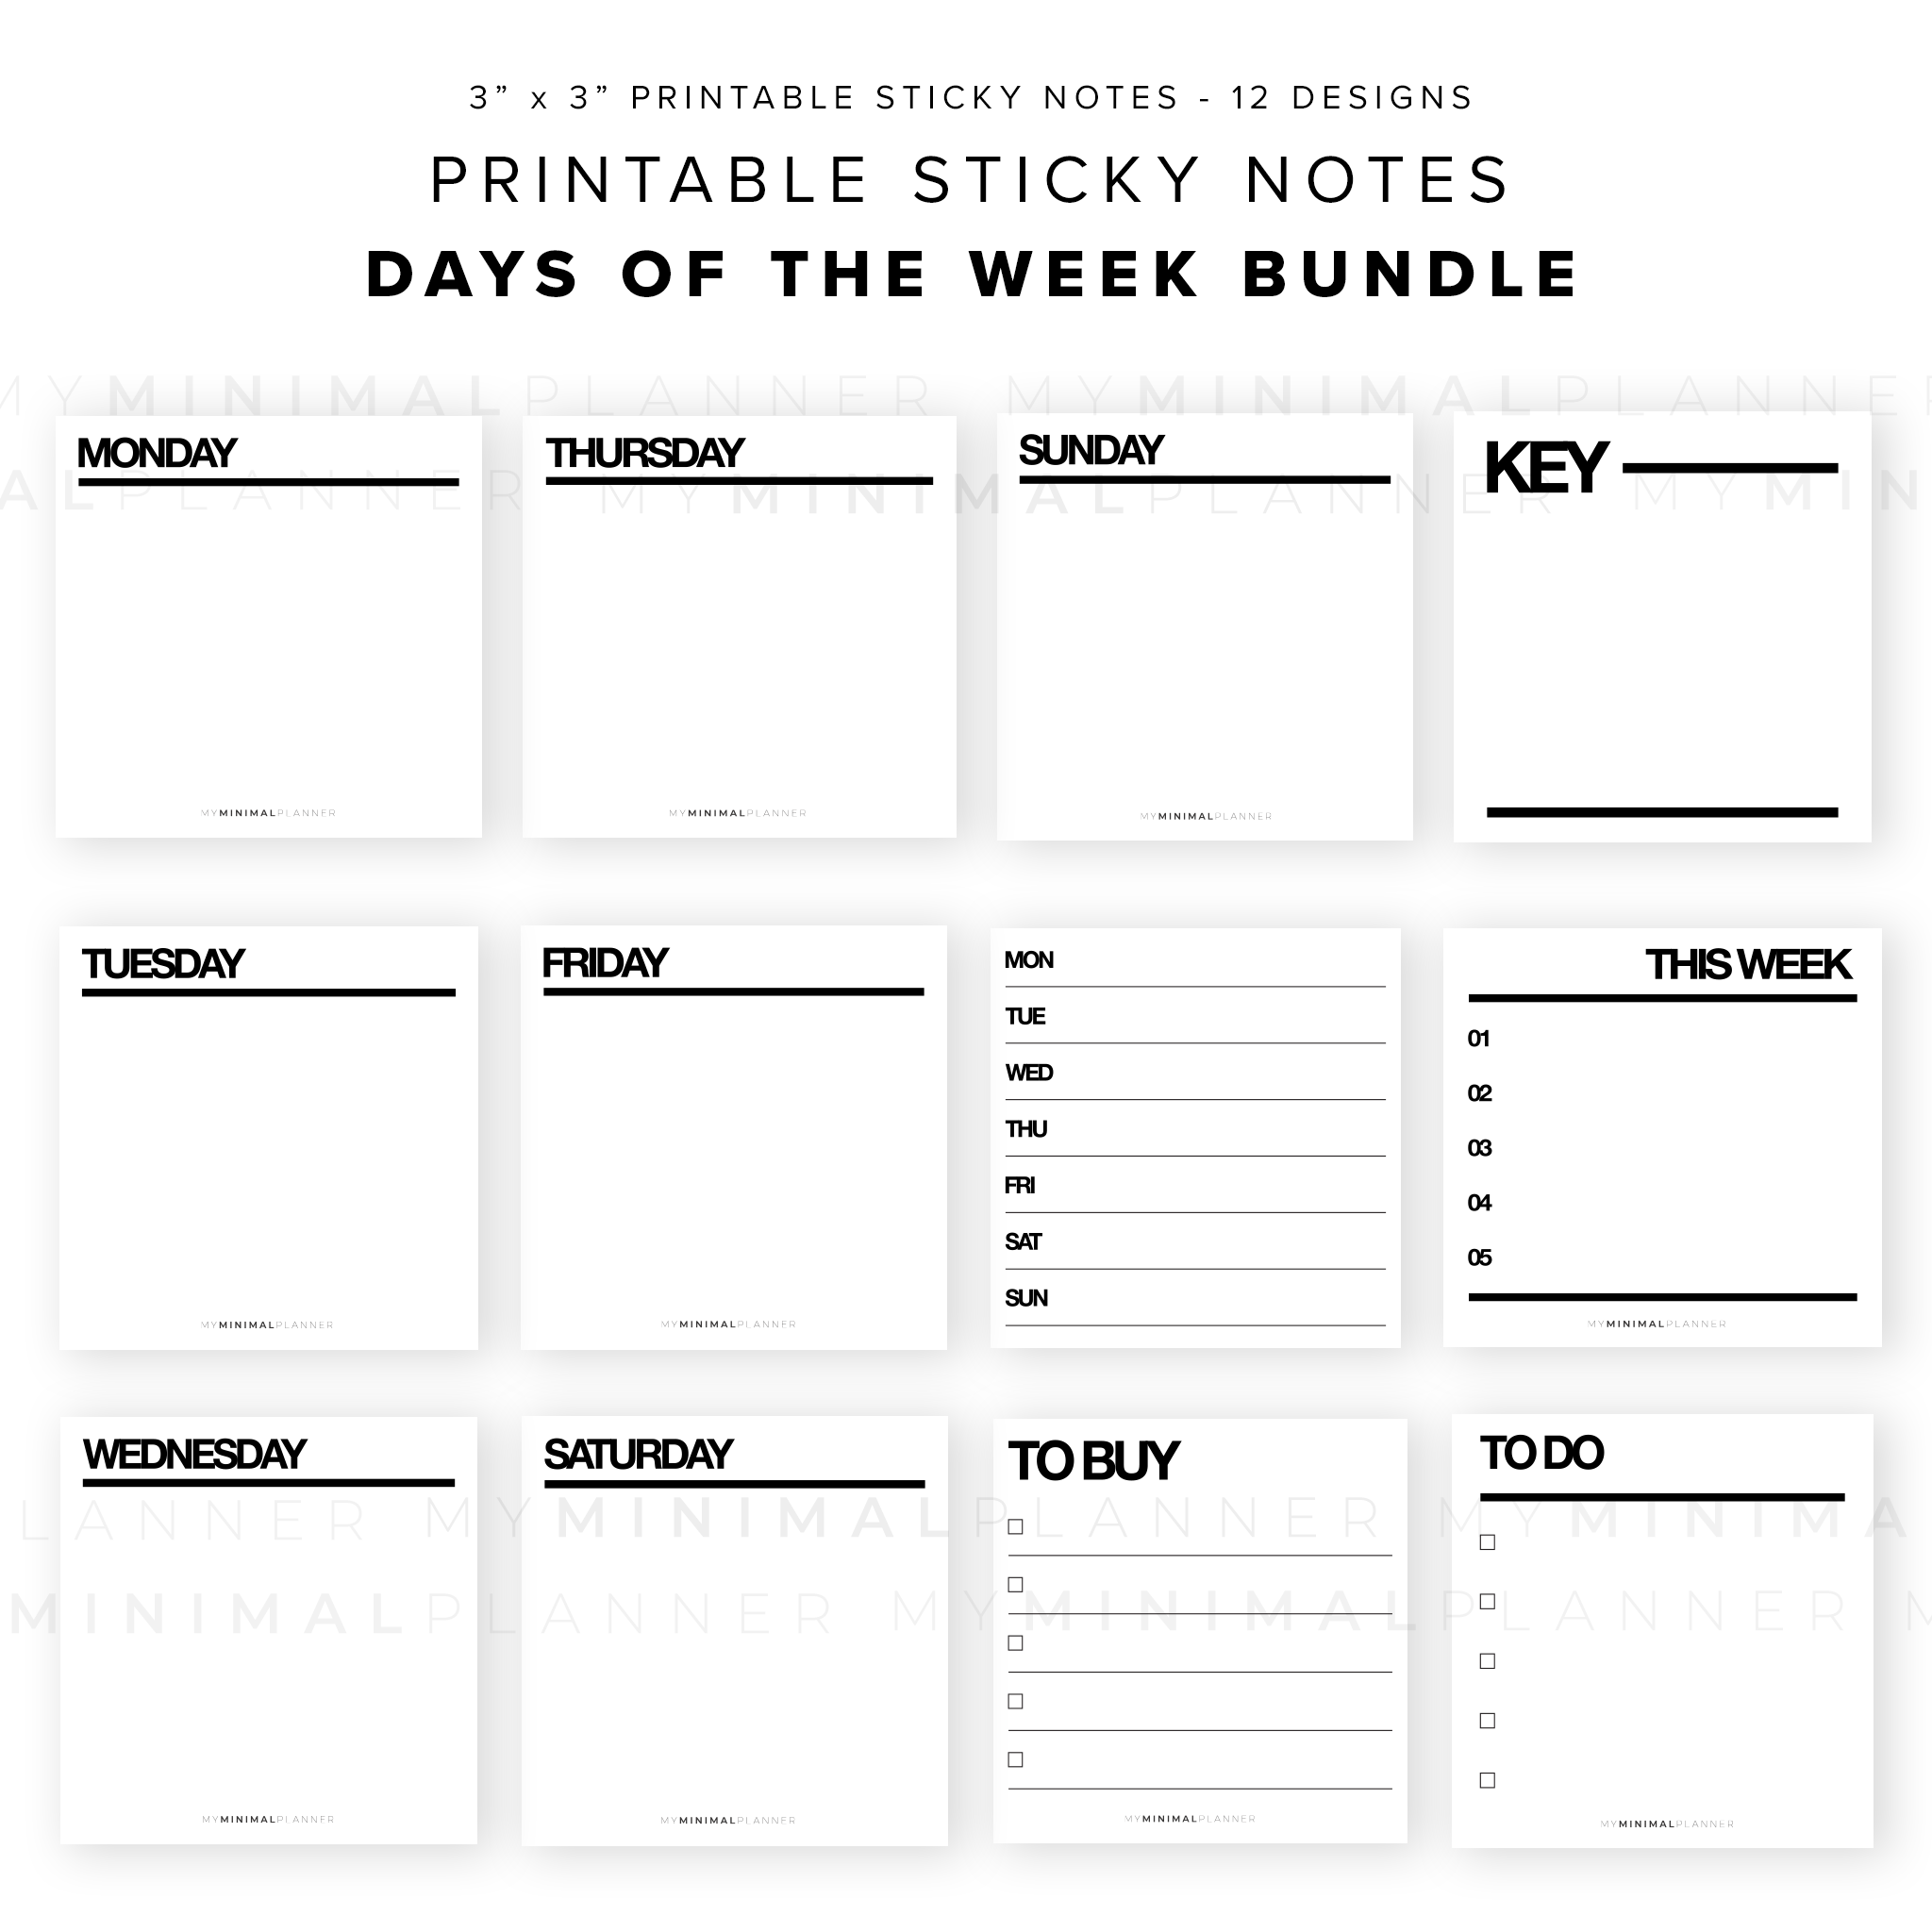 PSN03 - Days of the Week - Printable Sticky Notes